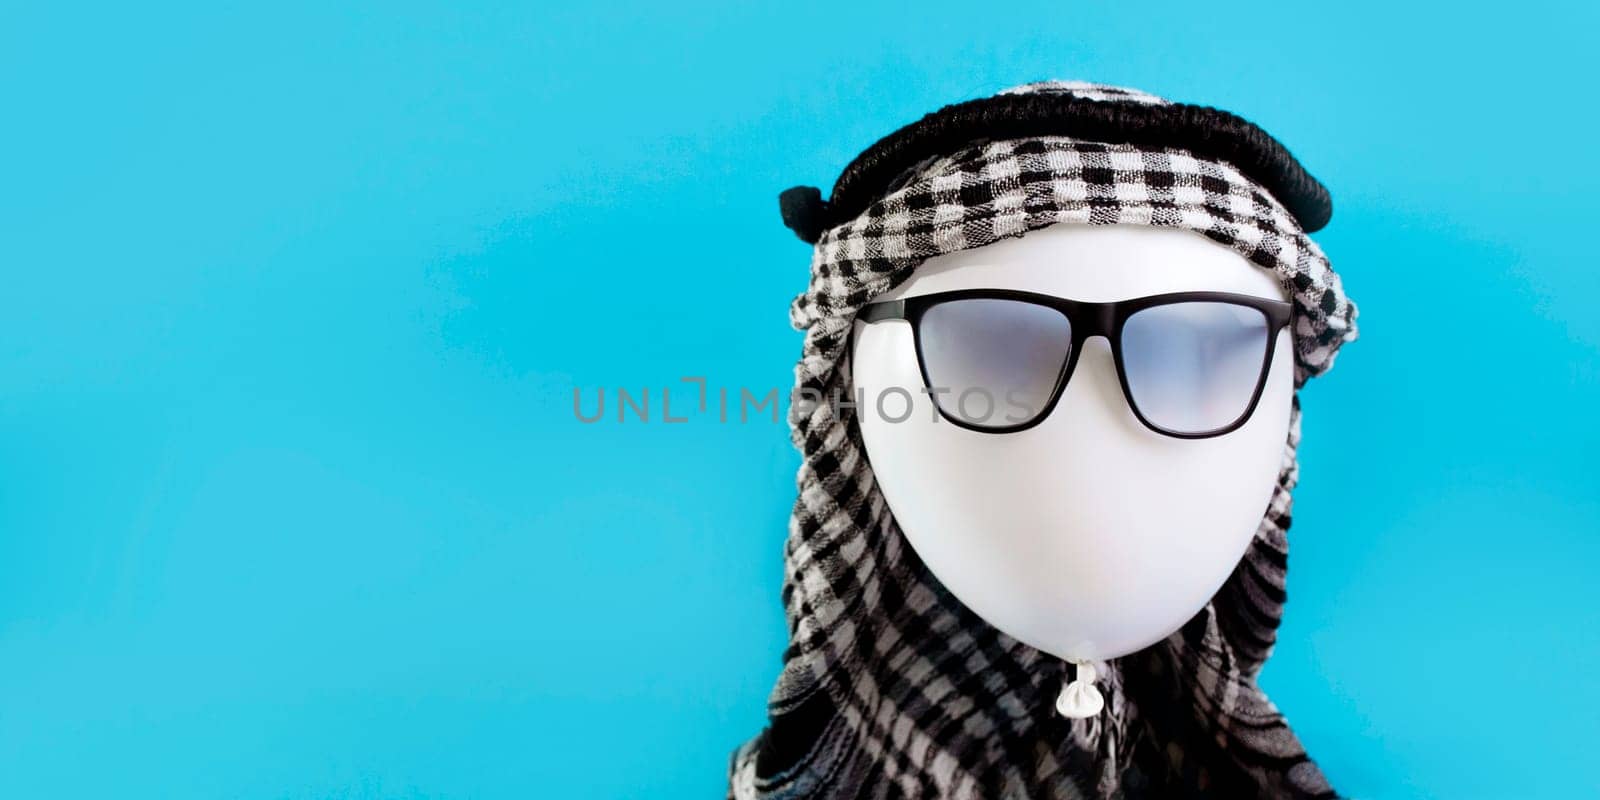 Balloon traveler in sunglasses and arafat concept tourist in Dubai or Egypt by malyshph